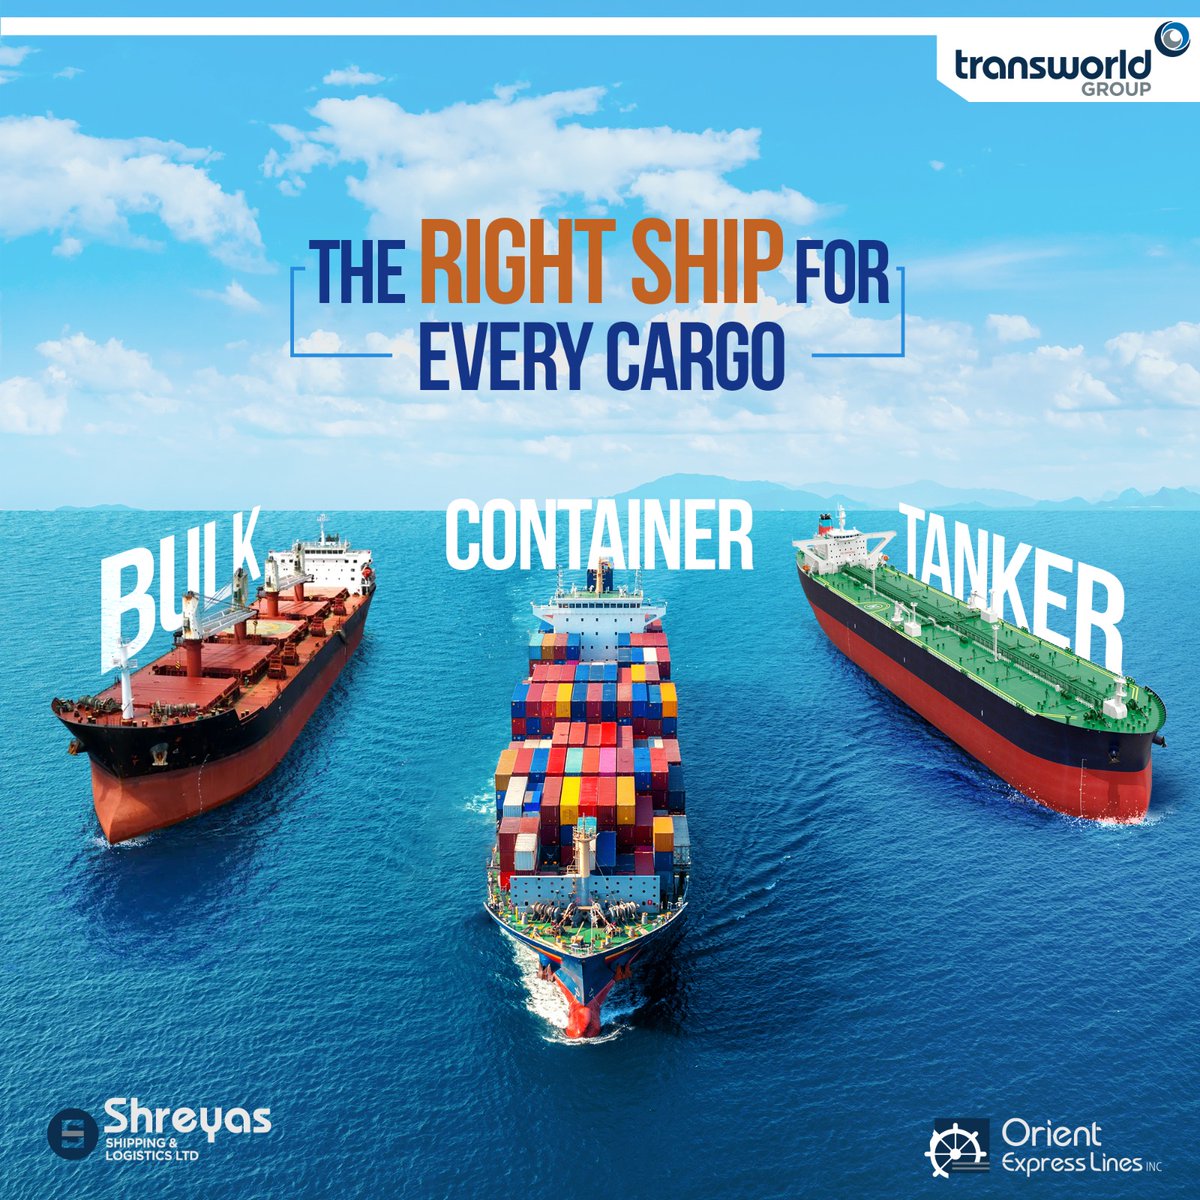 At Transworld Group, we've got the perfect vessel for every cargo – whether it's #bulk, #container, or #tanker. Trust in our fleet, trust in our legacy.

Know more: transworld.com

#TranswordGroup #Shipping #ShreyasShipping #OrientExpressLines #ContainerShipping